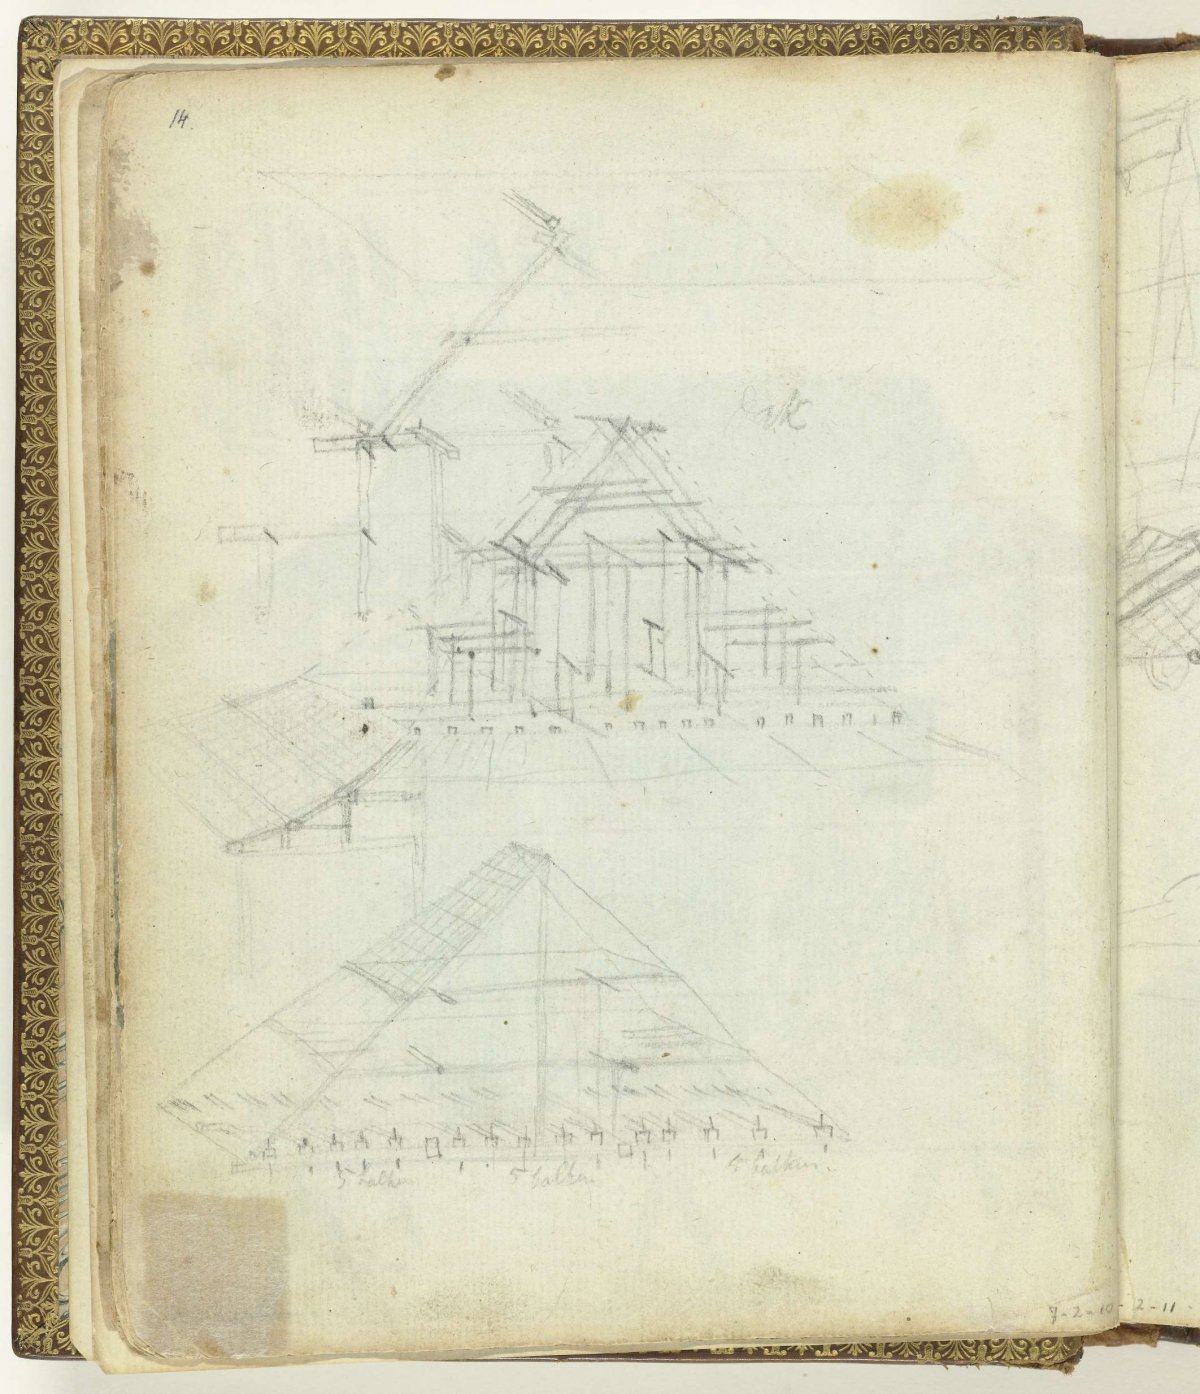 Sketch of a roof structure, Jan Brandes, 1770 - 1808